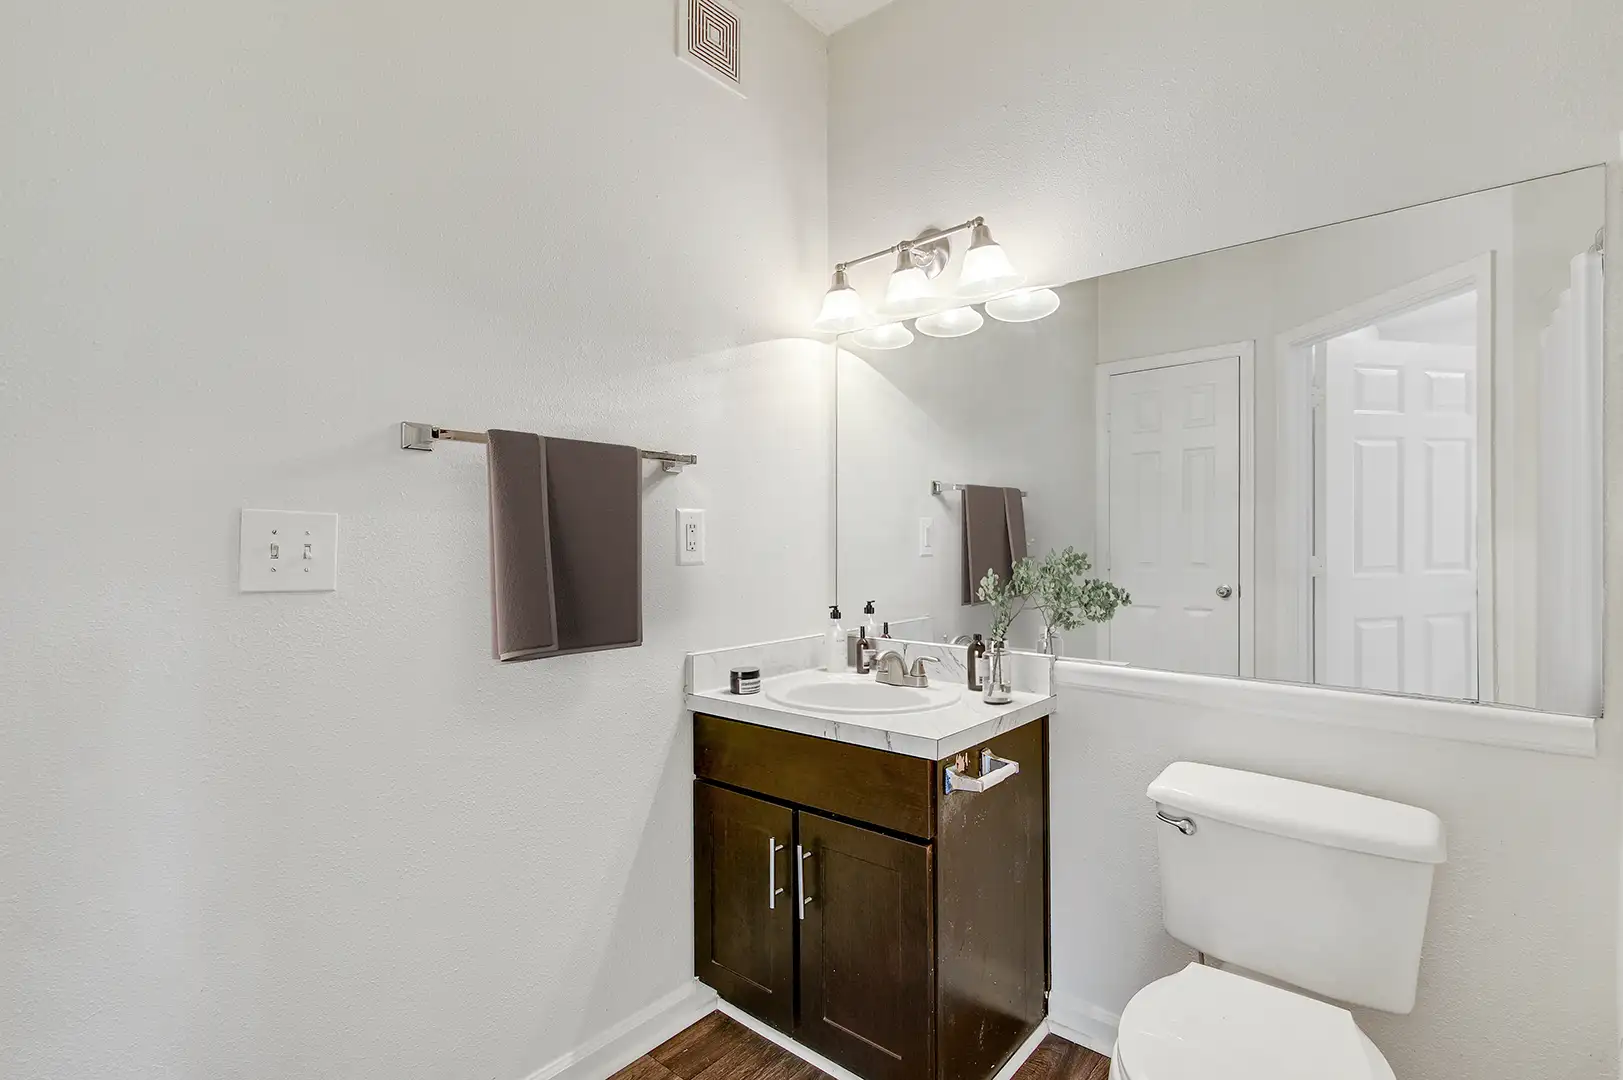 Bathroom with woodlike flooring and a sink with counterspace